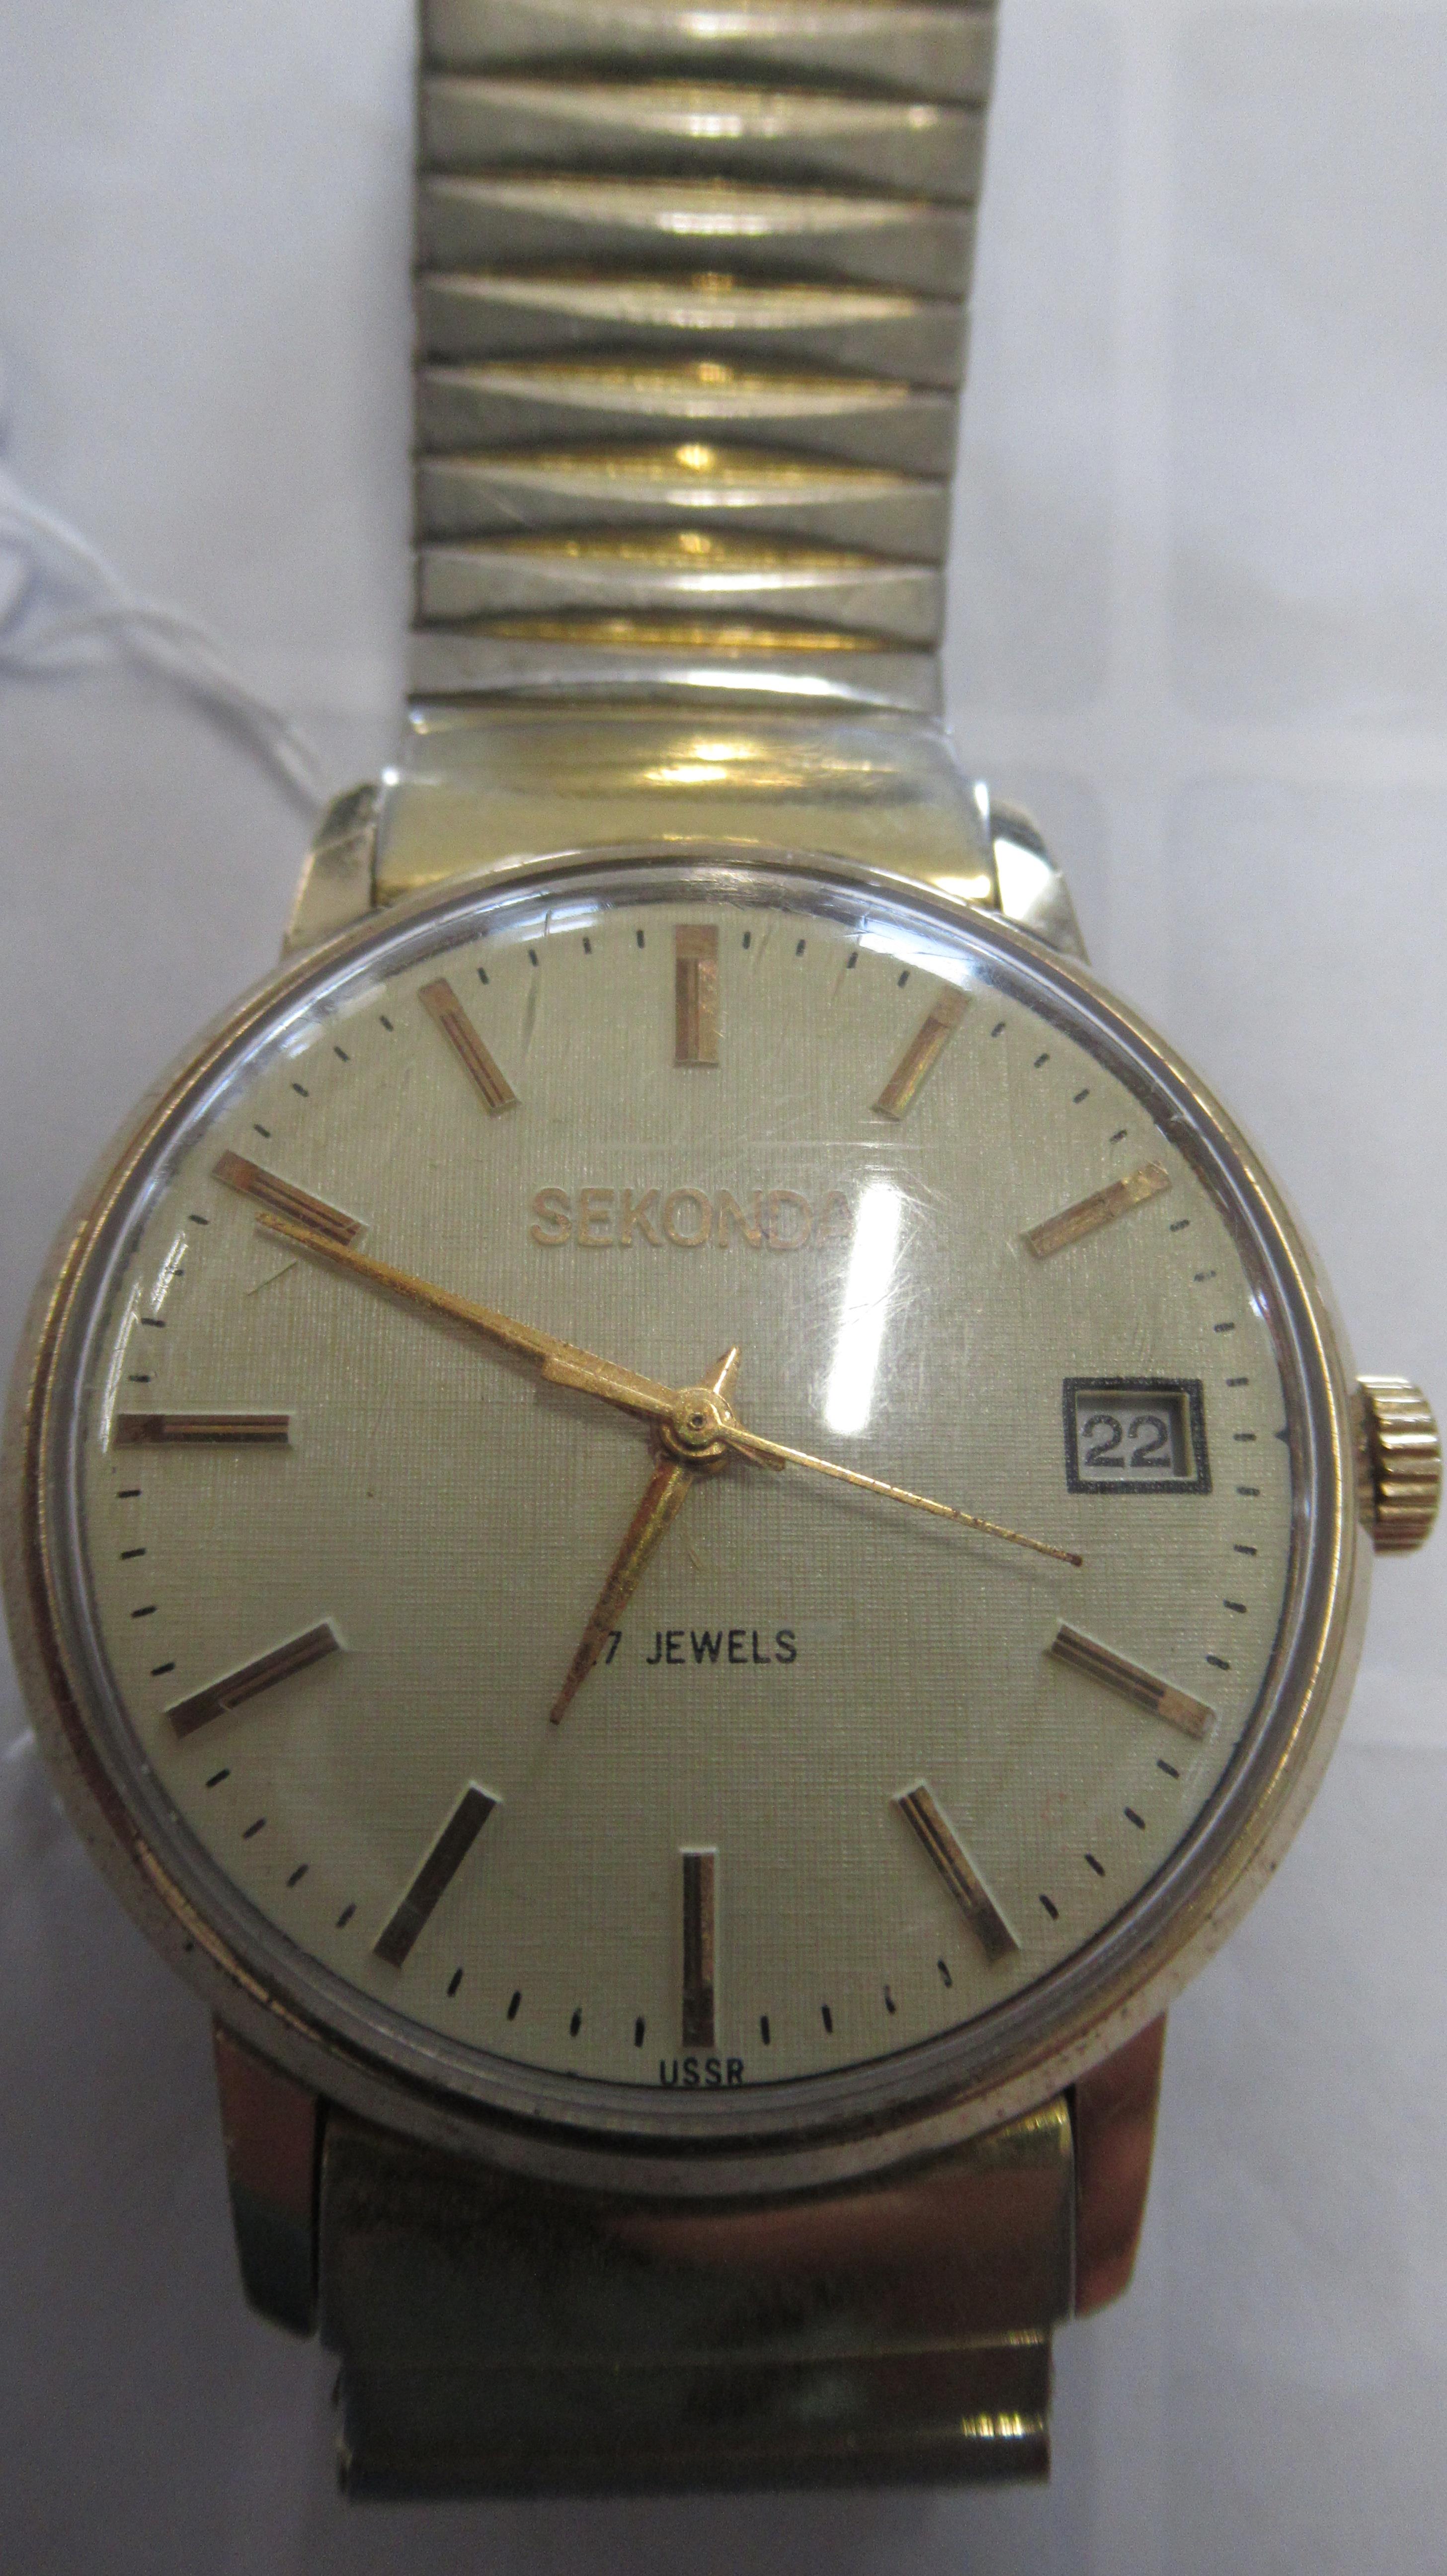 A gents Sekonda auto with date on gold metal bracelet - working in the saleroom - case size 33mm